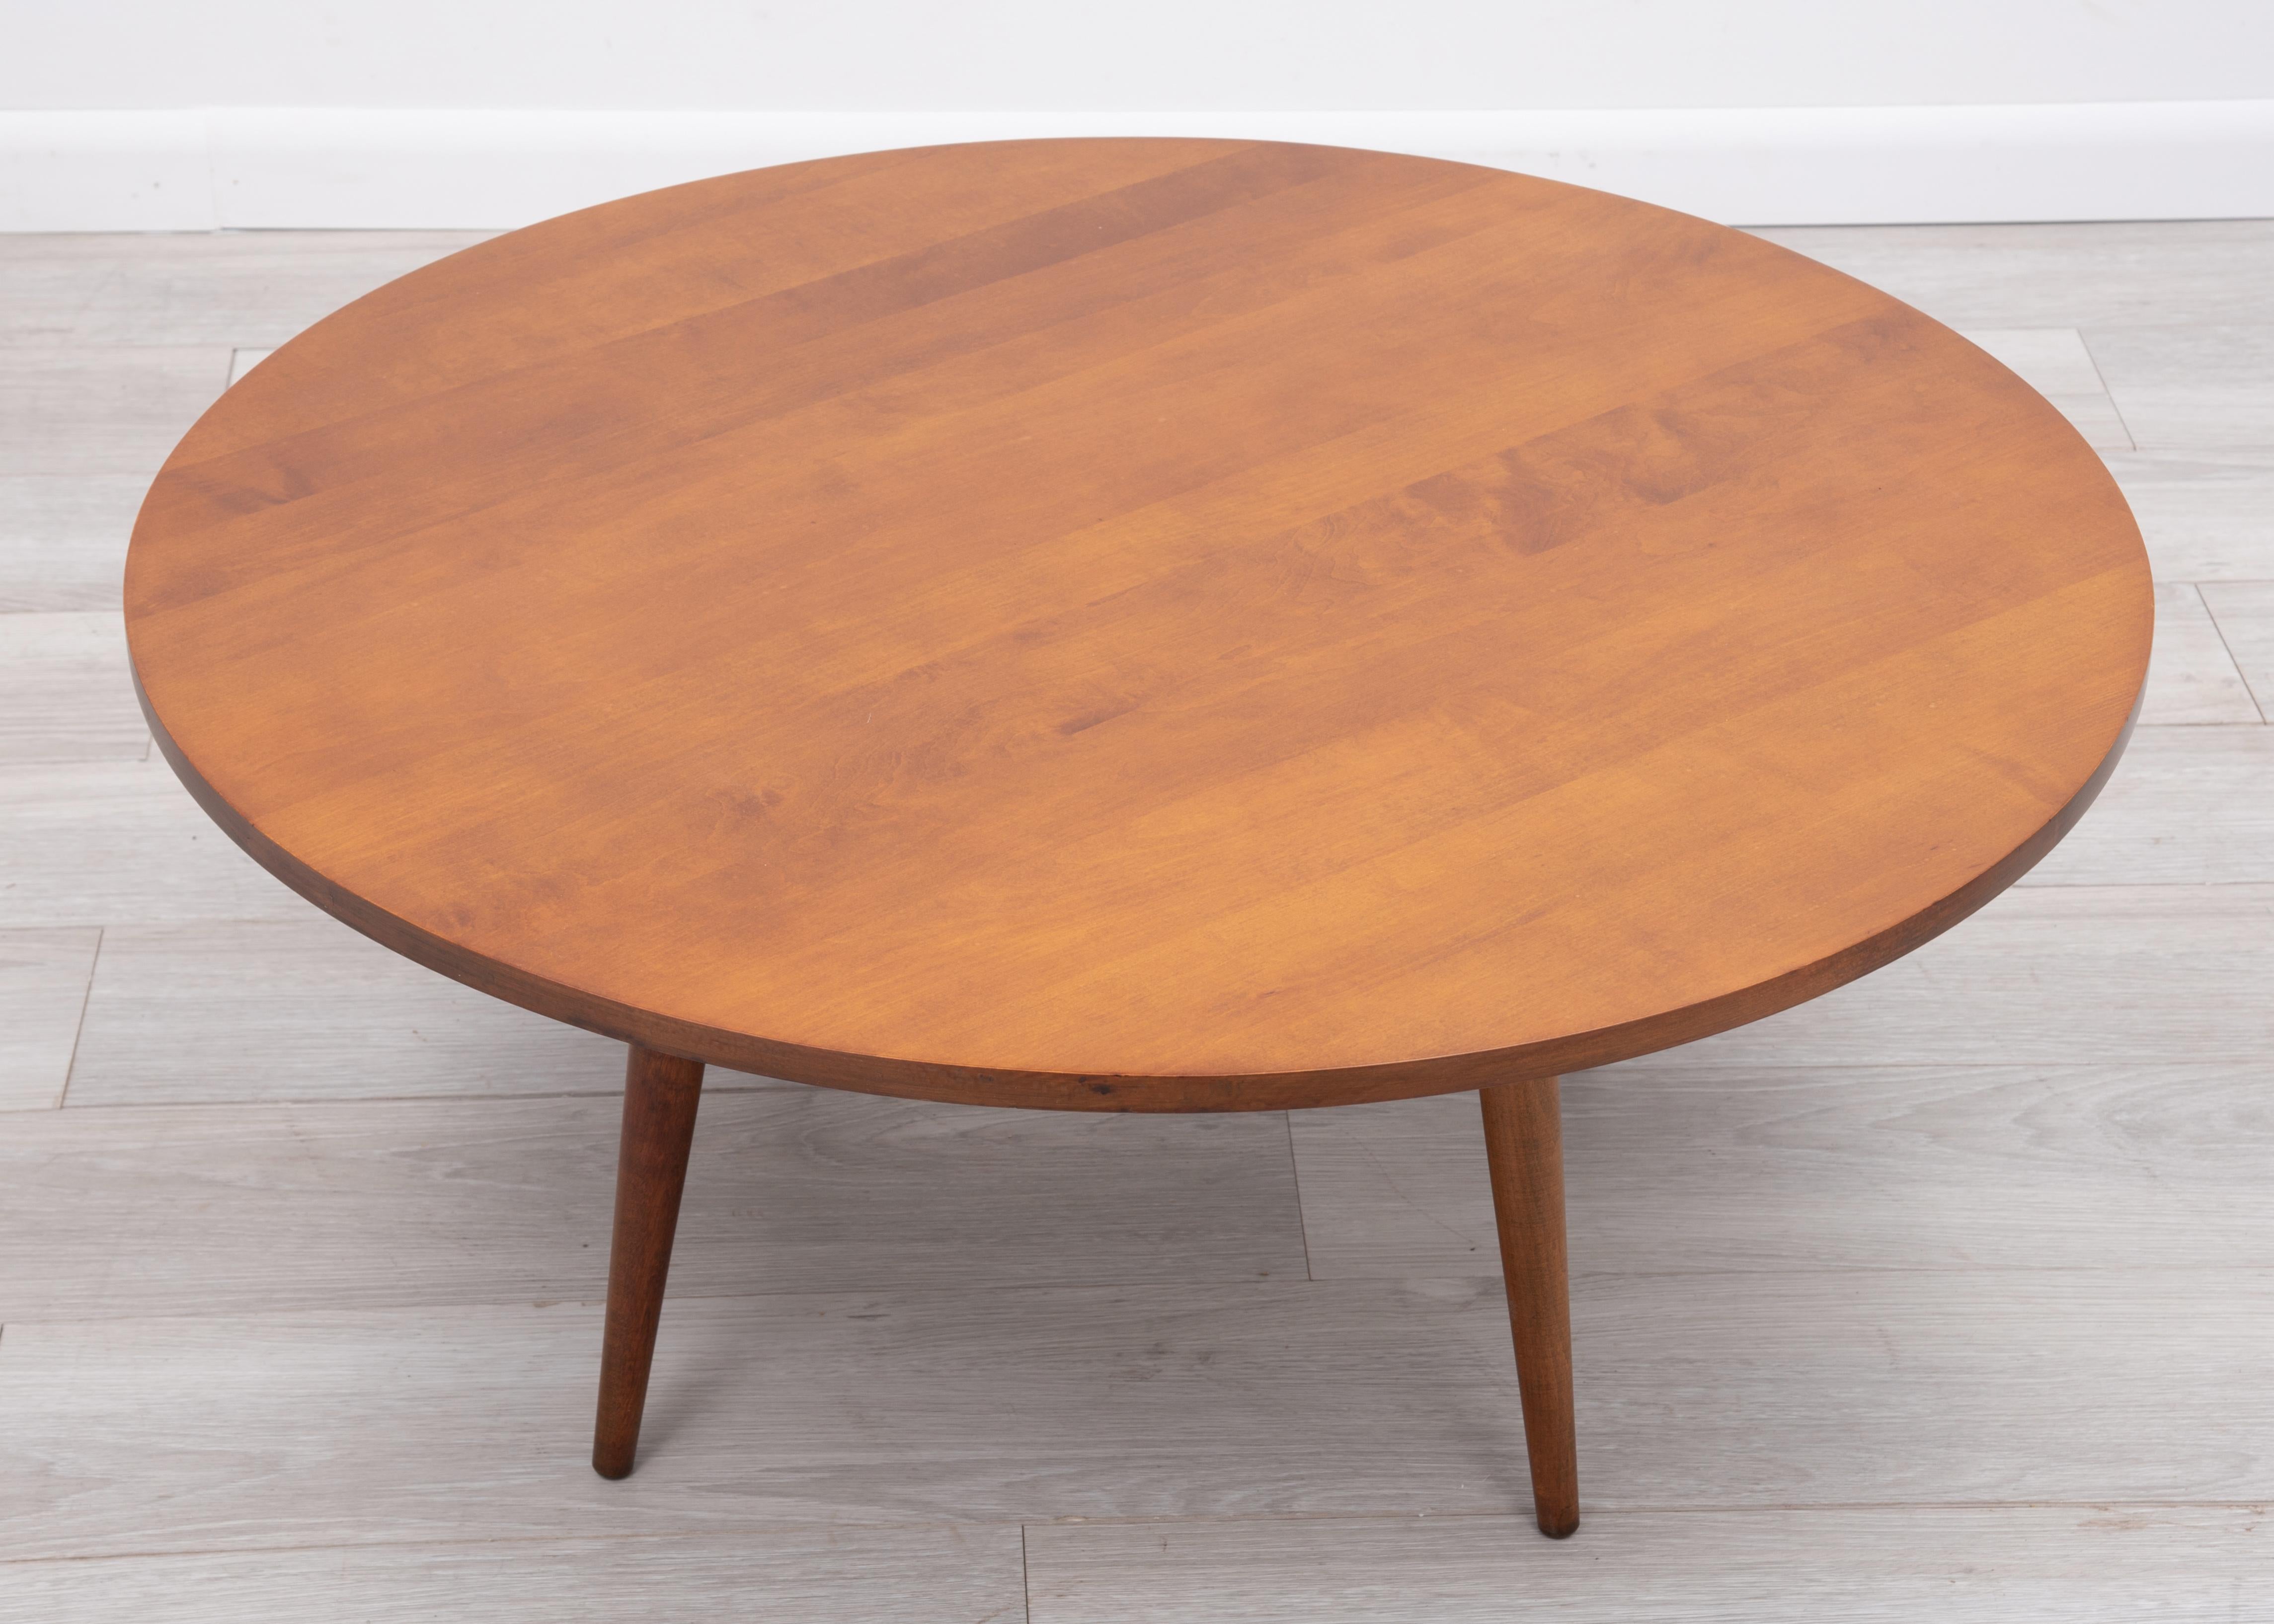 Round Paul McCobb Planner Group Coffee Table Winchendon Unmarked 1950s For Sale 4